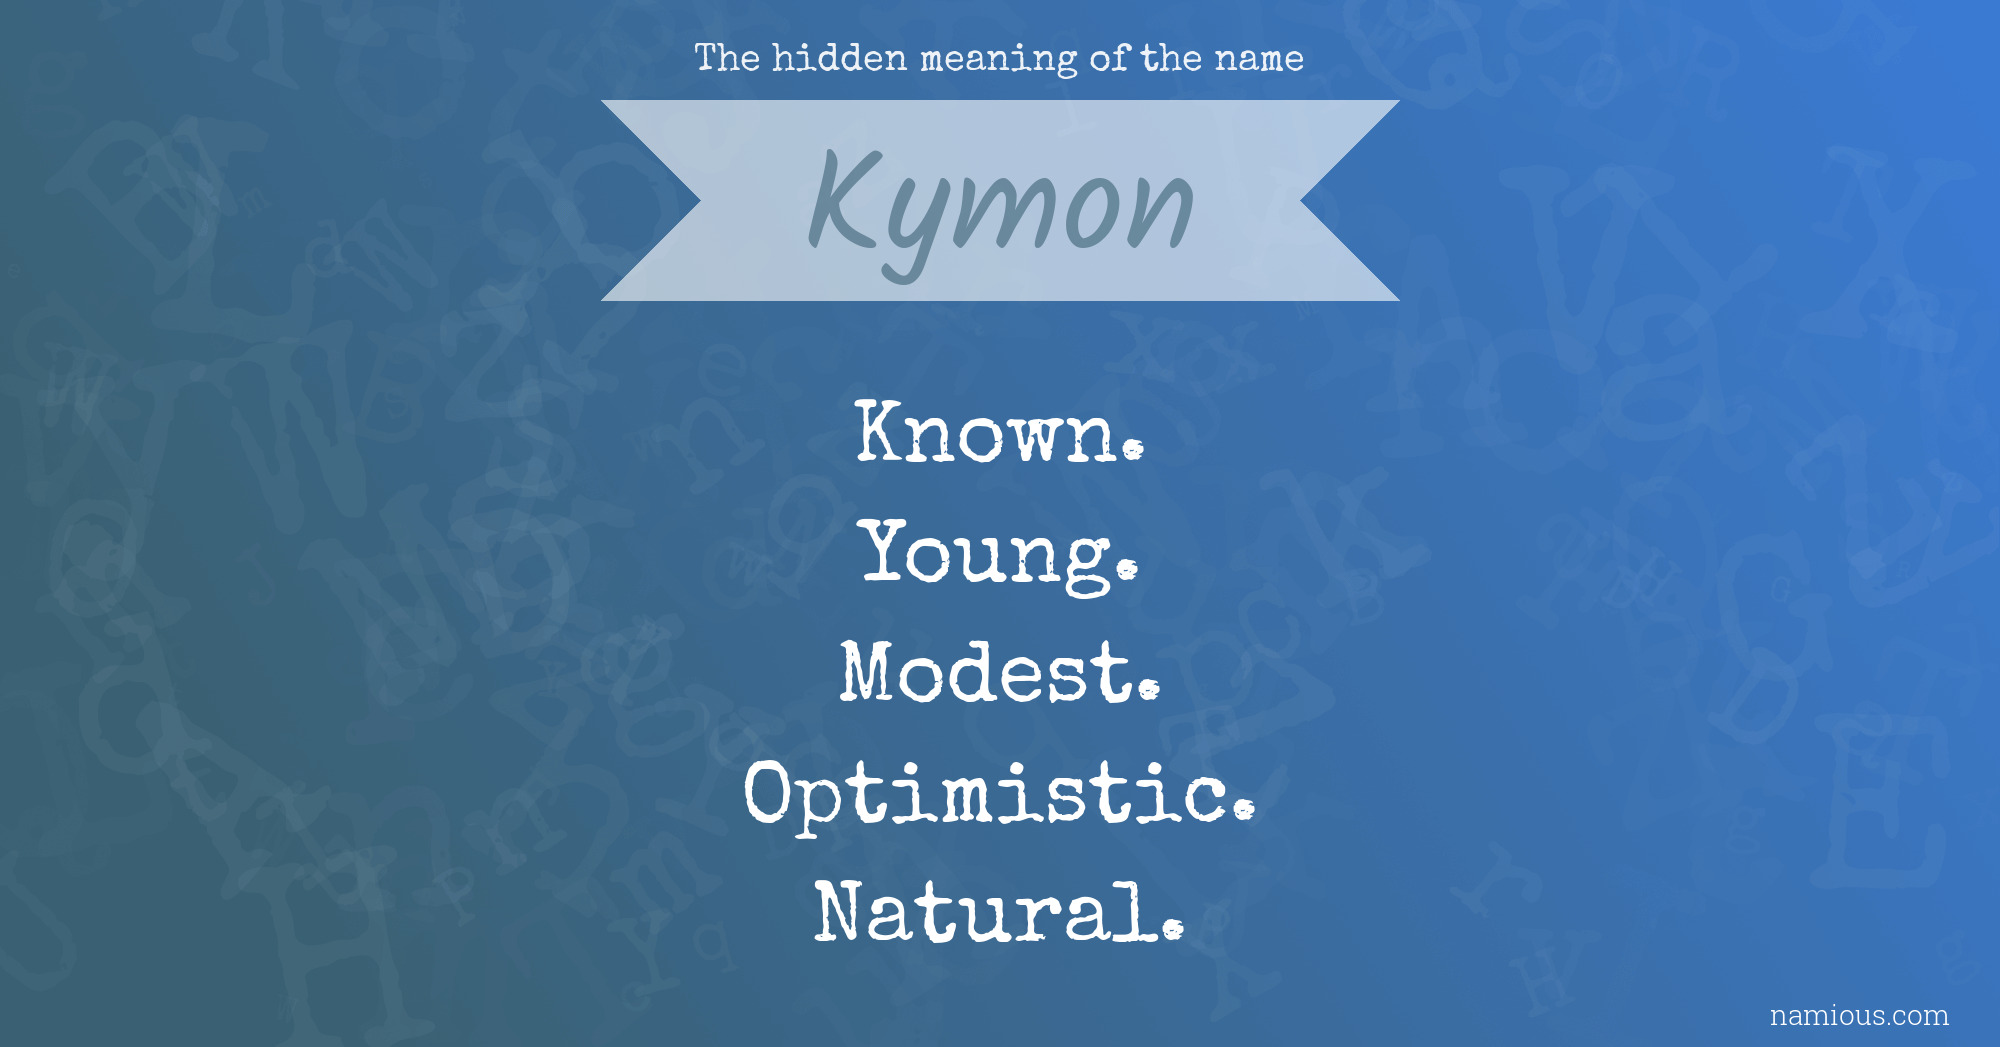 The hidden meaning of the name Kymon